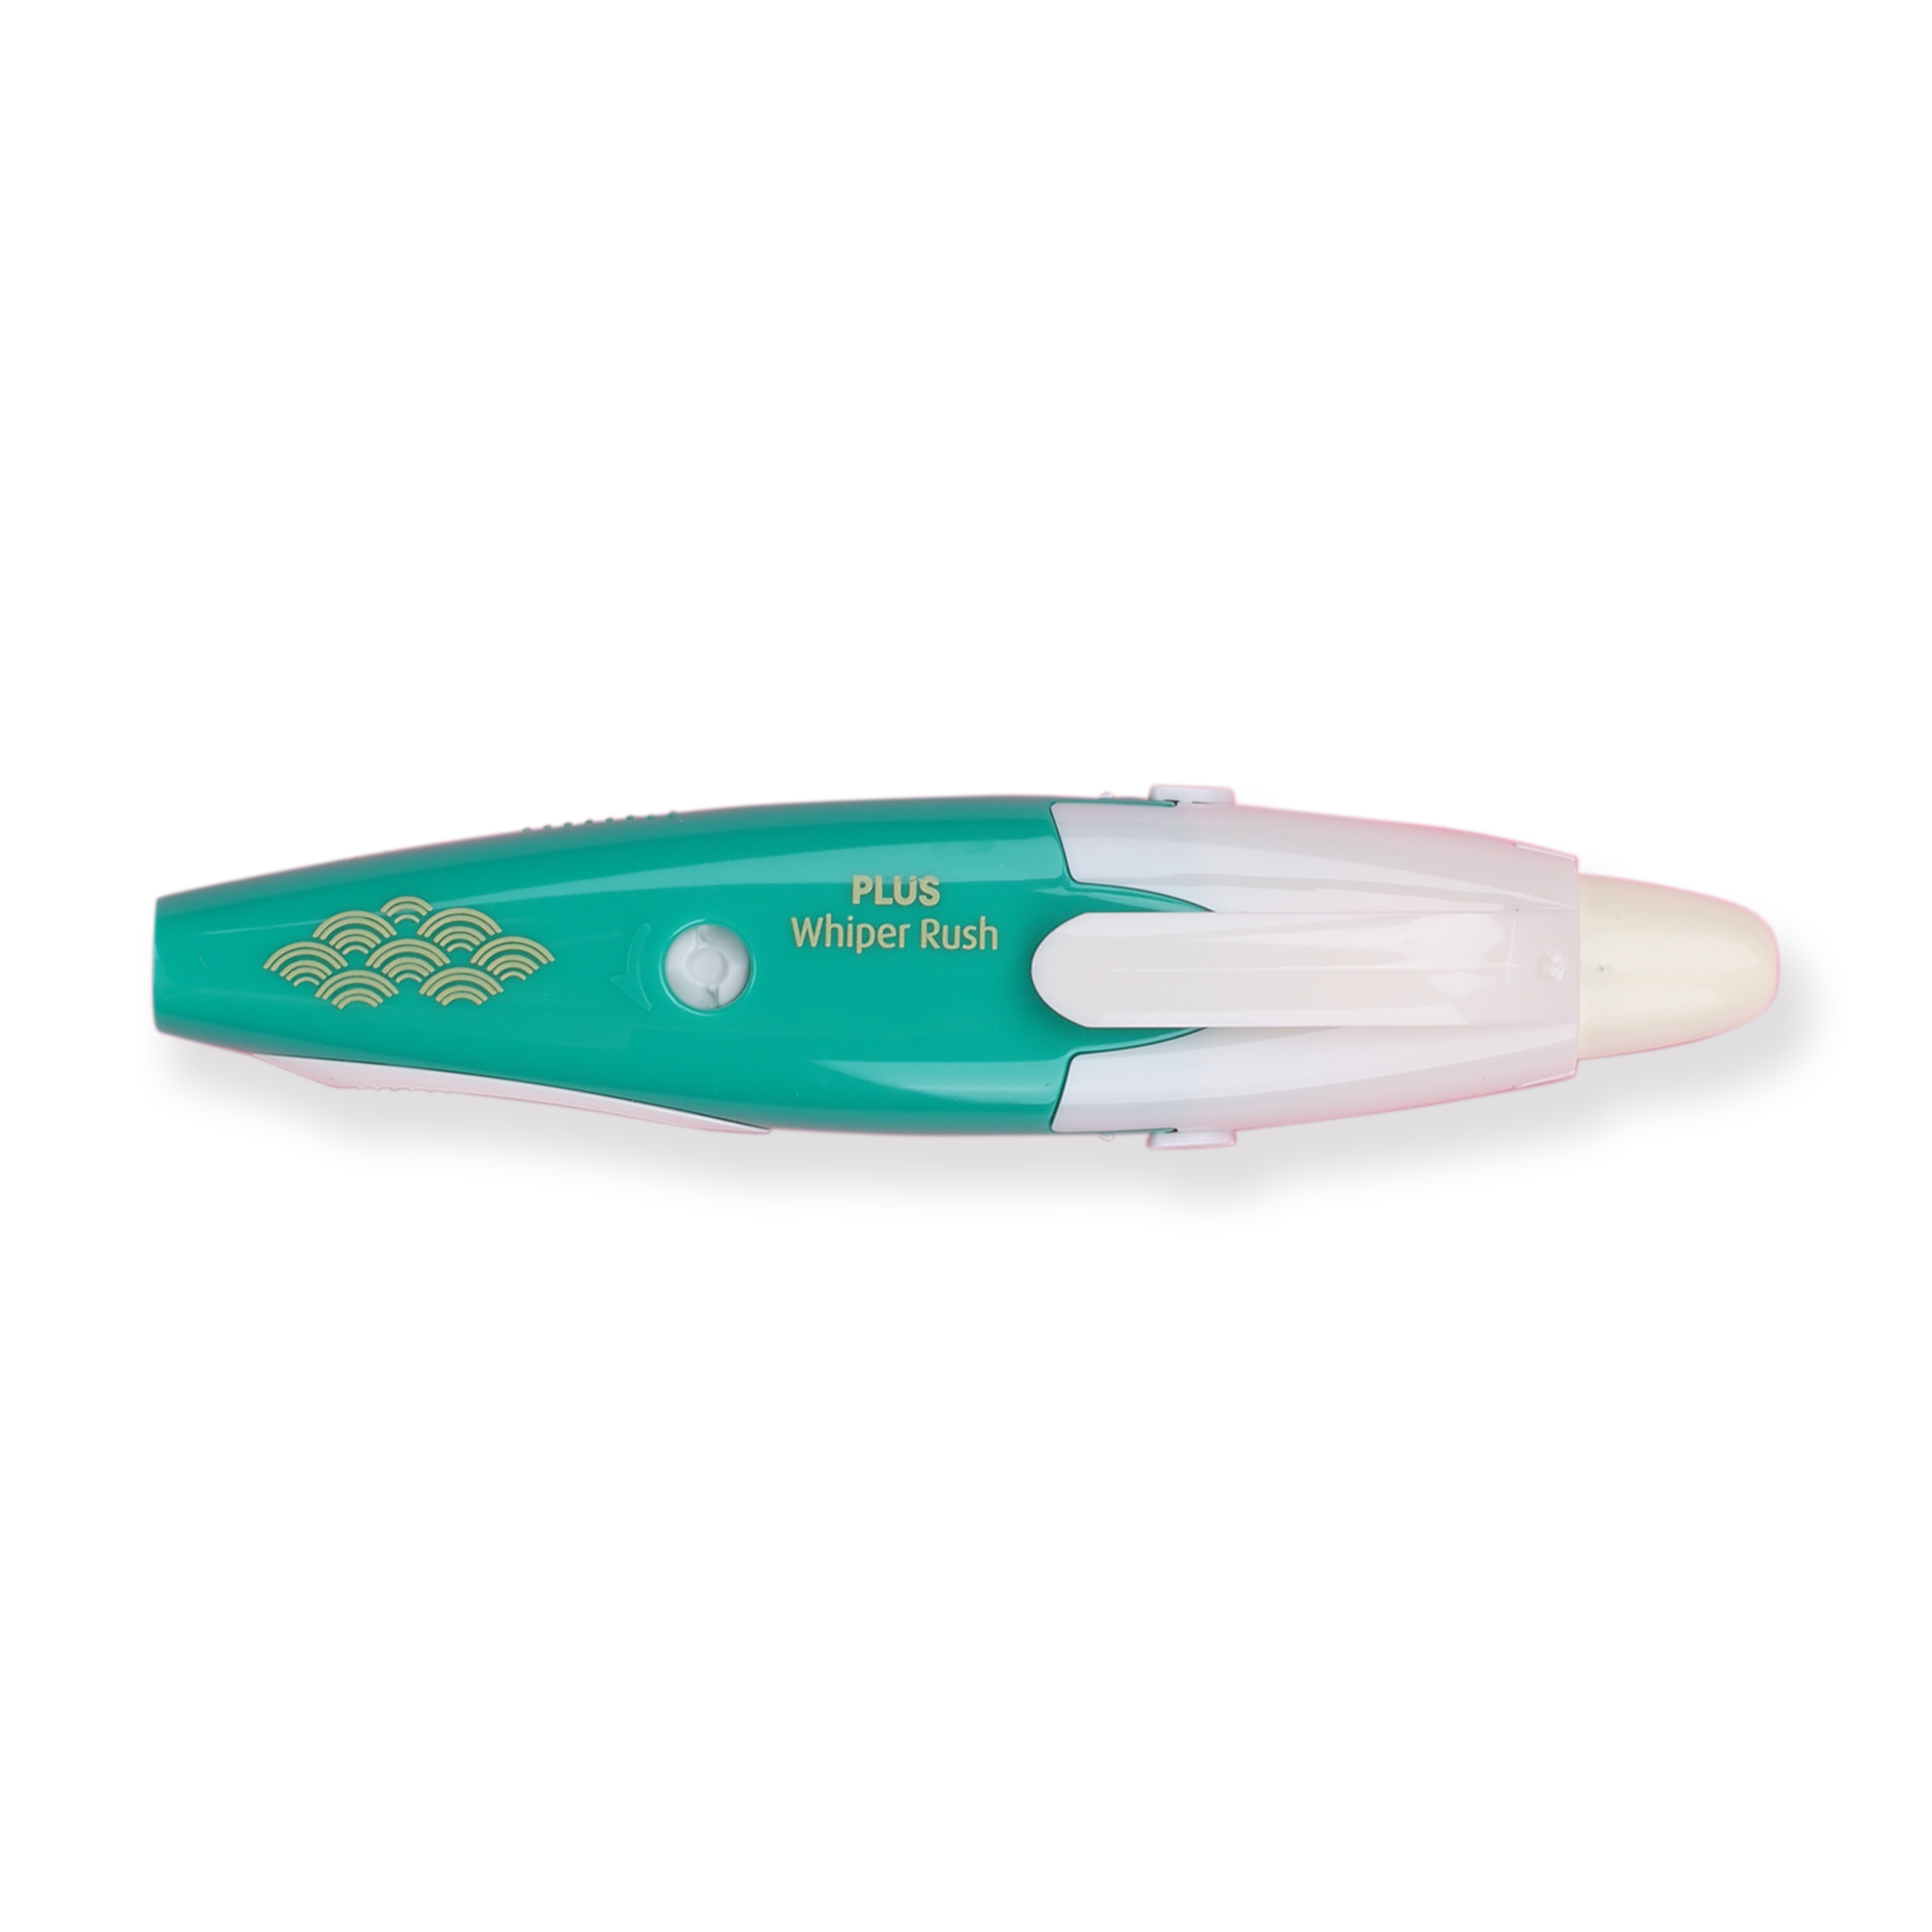 Plus Whiper Rush Correction Tape - Special Edition - Kamakura - Stationery Pal